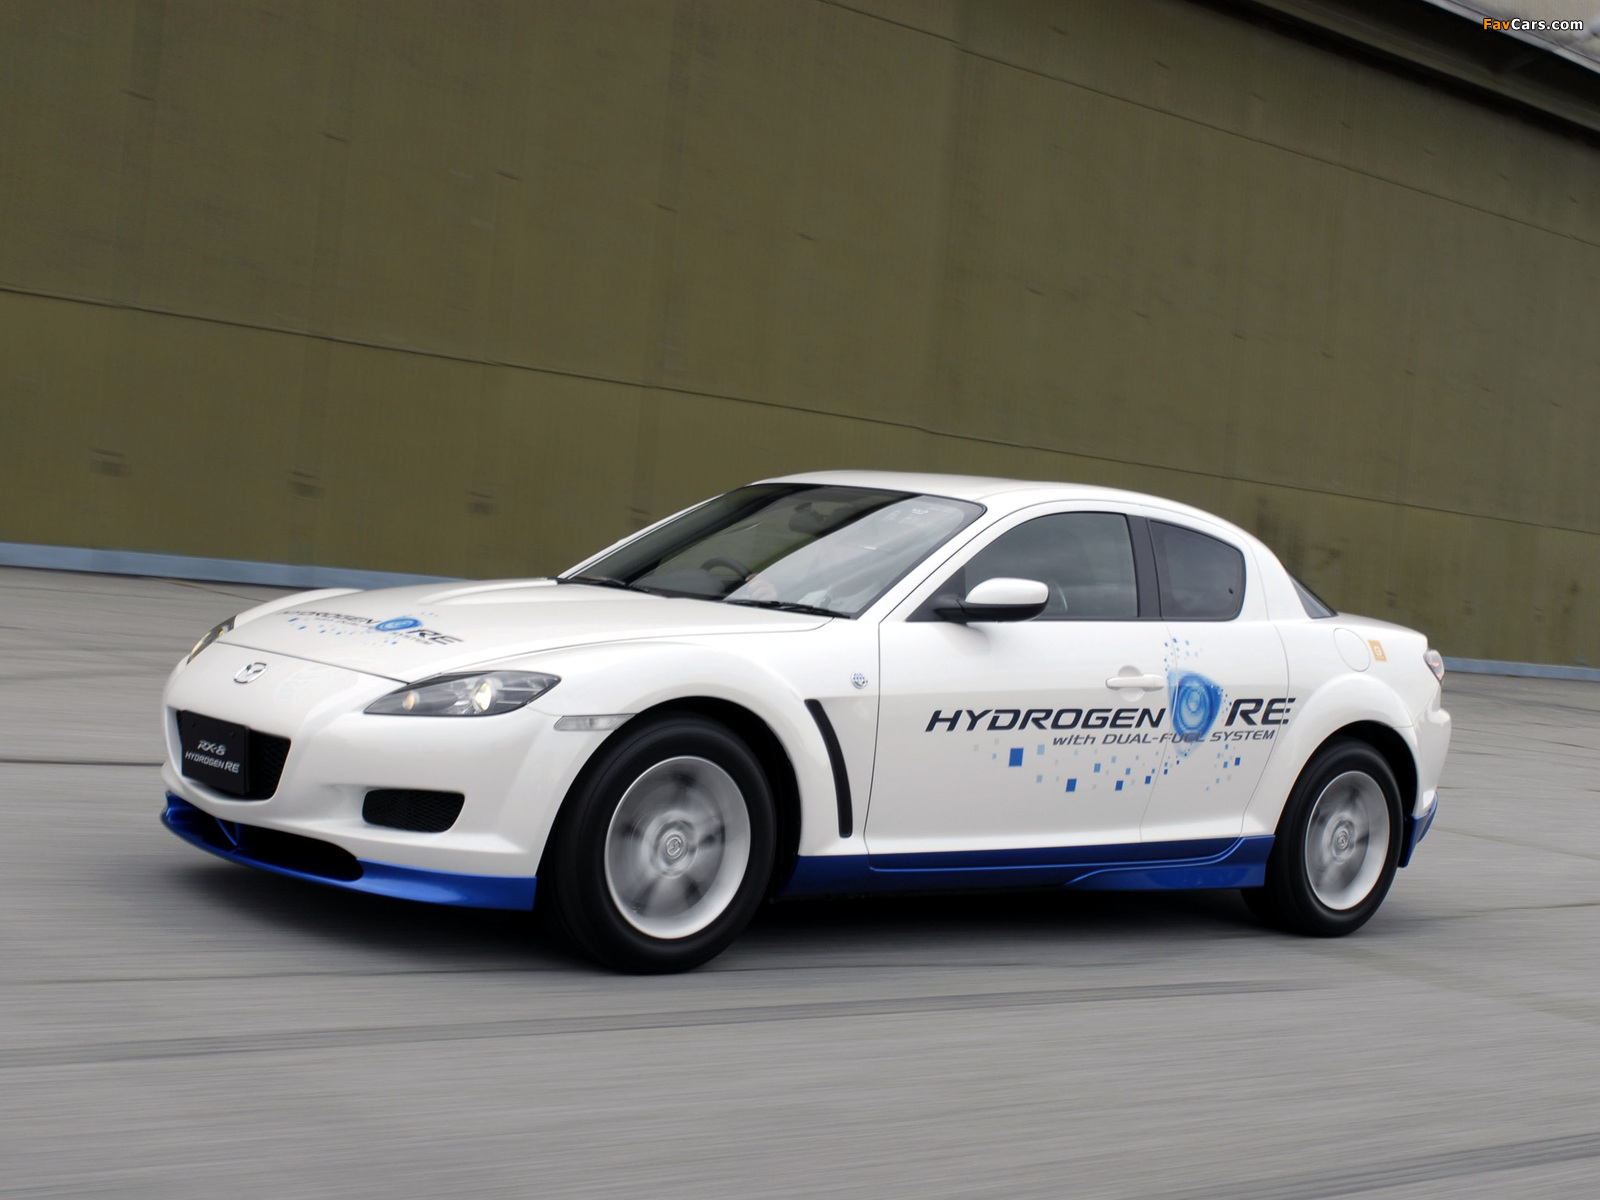 Mazda RX-8 Hydrogen RE 2004–08 pictures (1600 x 1200)